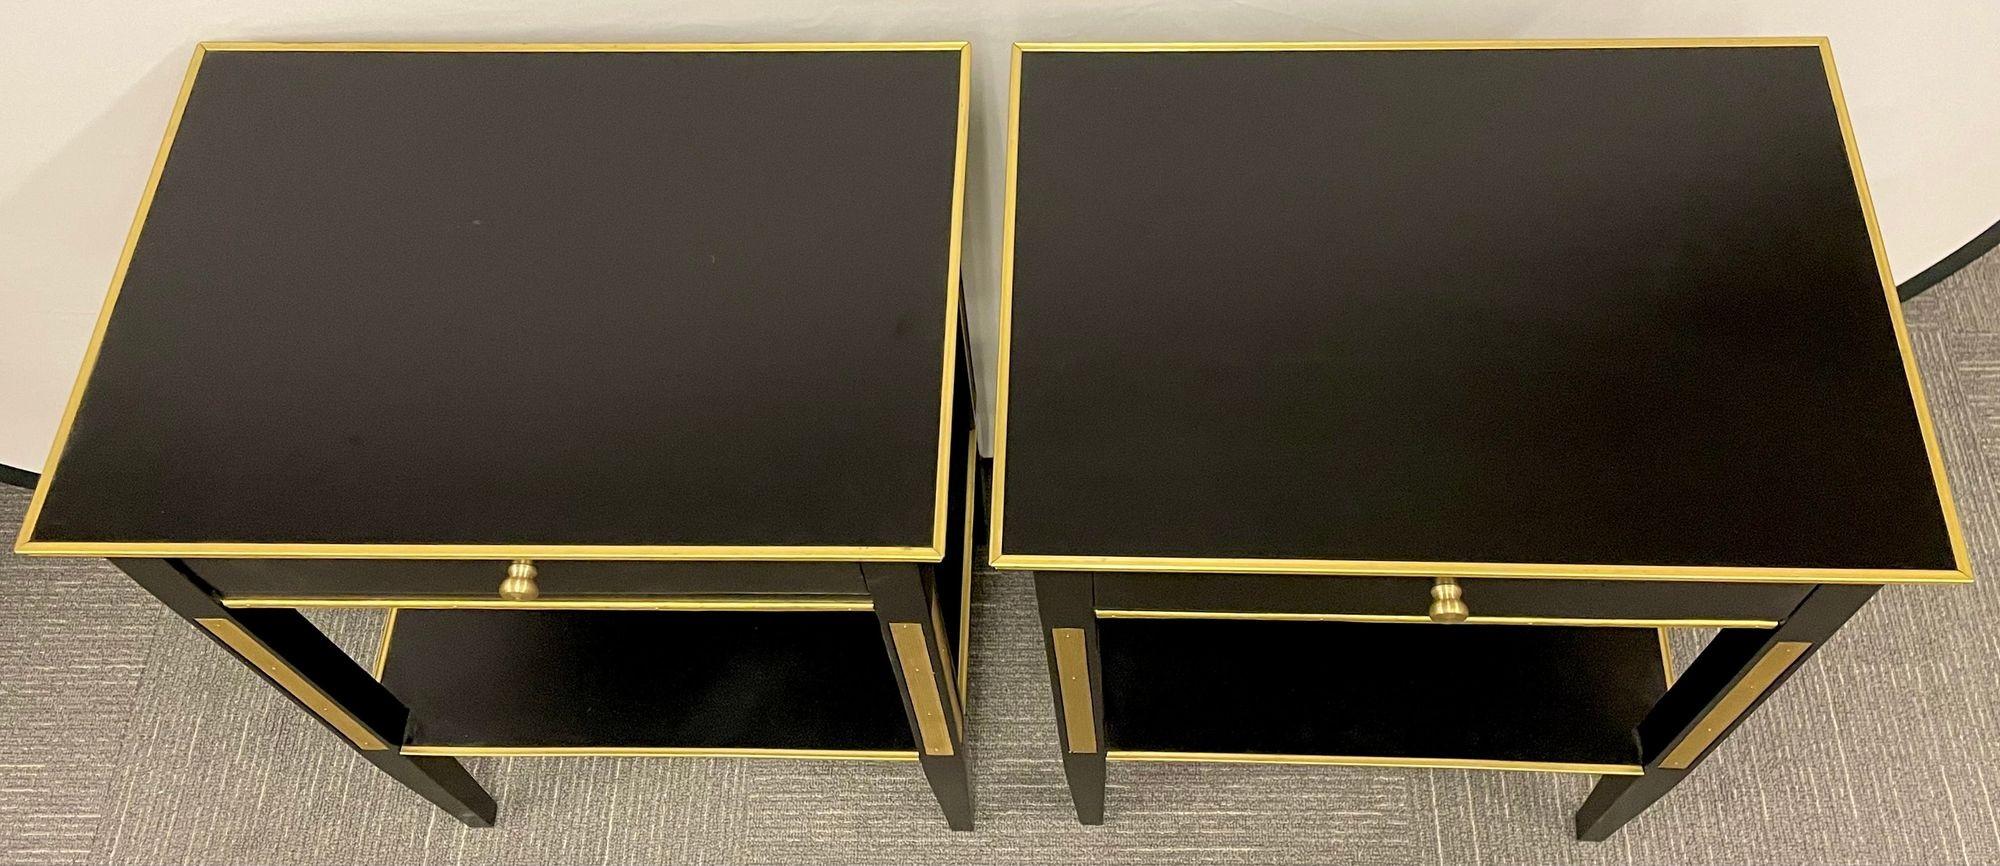 Pair of Russian Neoclassical Style Ebony Finish One Drawer Stands or End Tables For Sale 3